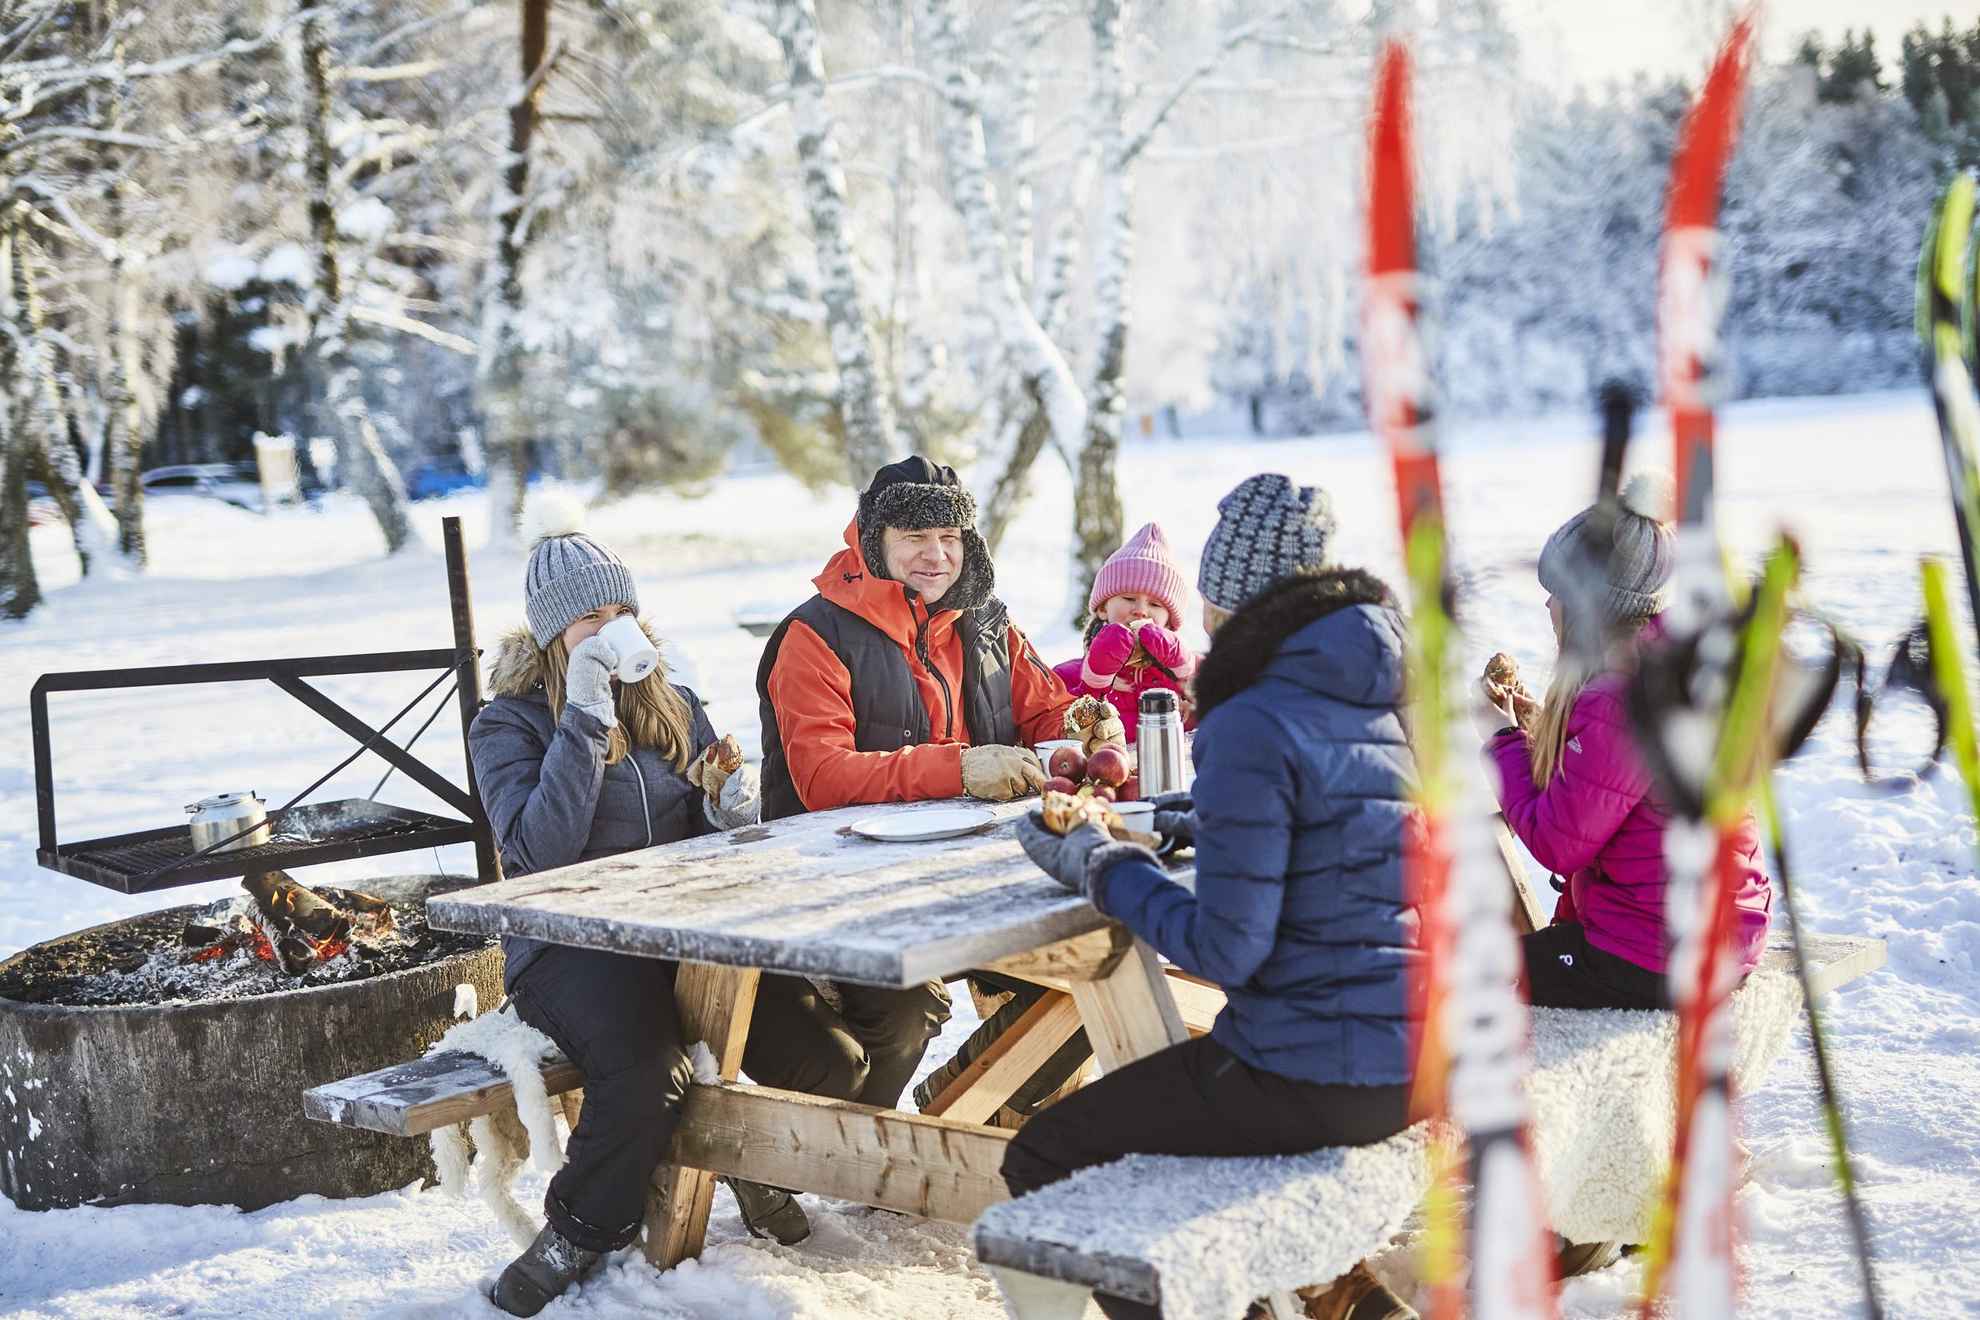 A family of five sitting outside at a table, eating cinnamon buns and drinking coffee. There are skis in the foreground of the picture.